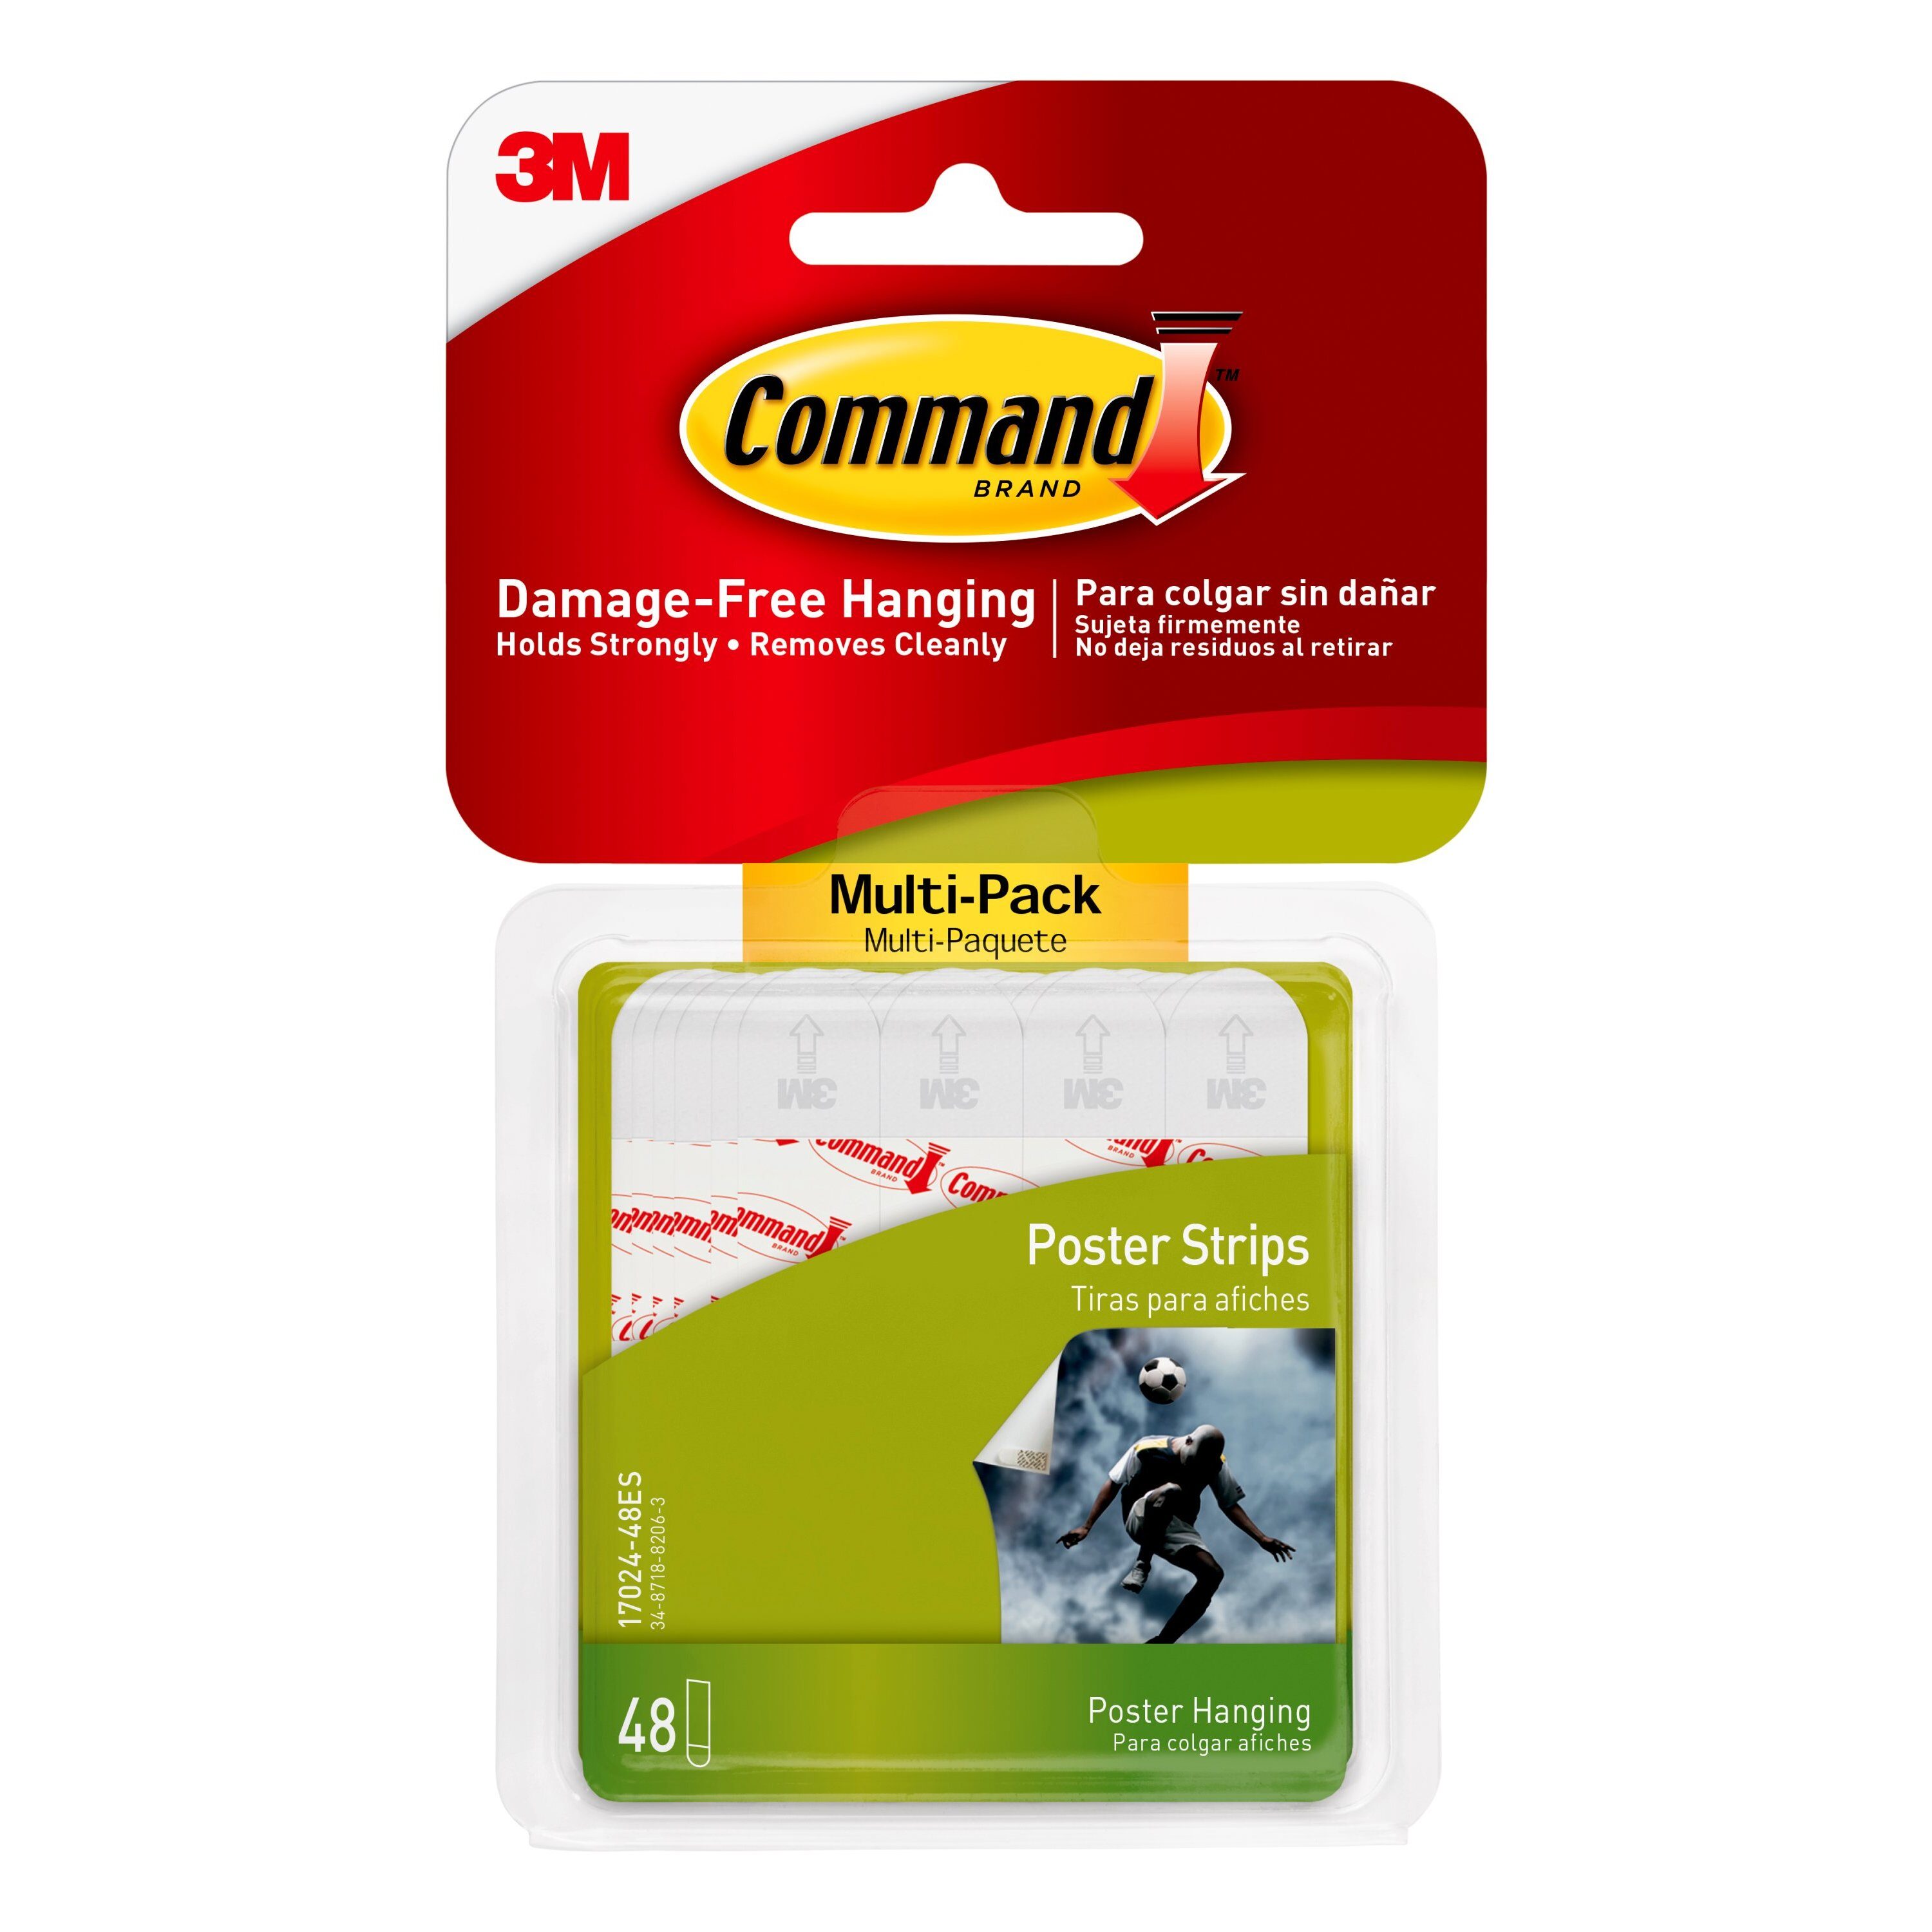 3M Command Poster Strips - 60 count